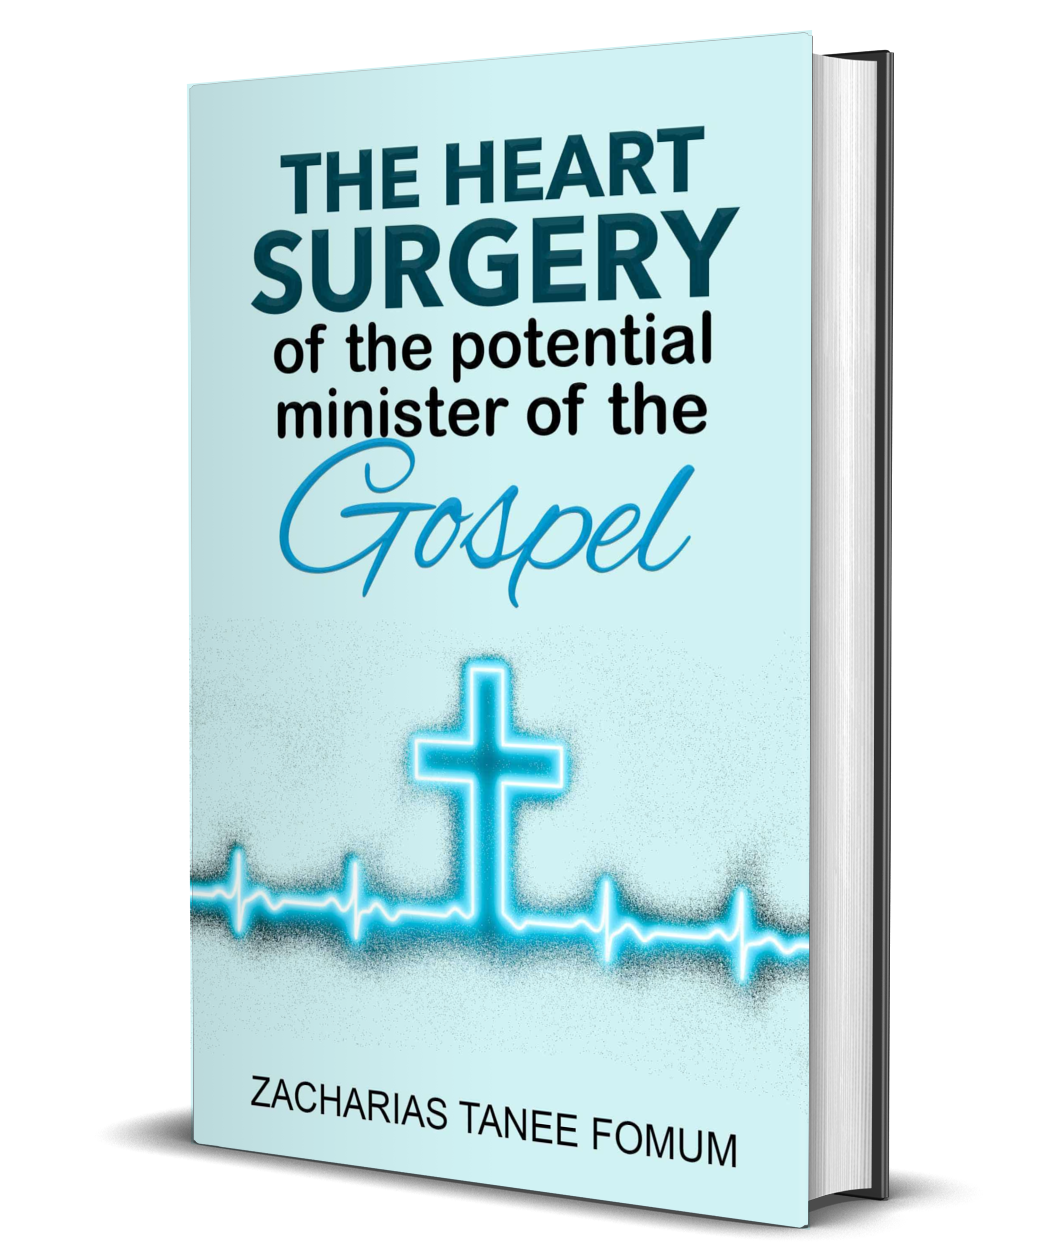 The Heart Surgery for the Potential Minister of the Gospel